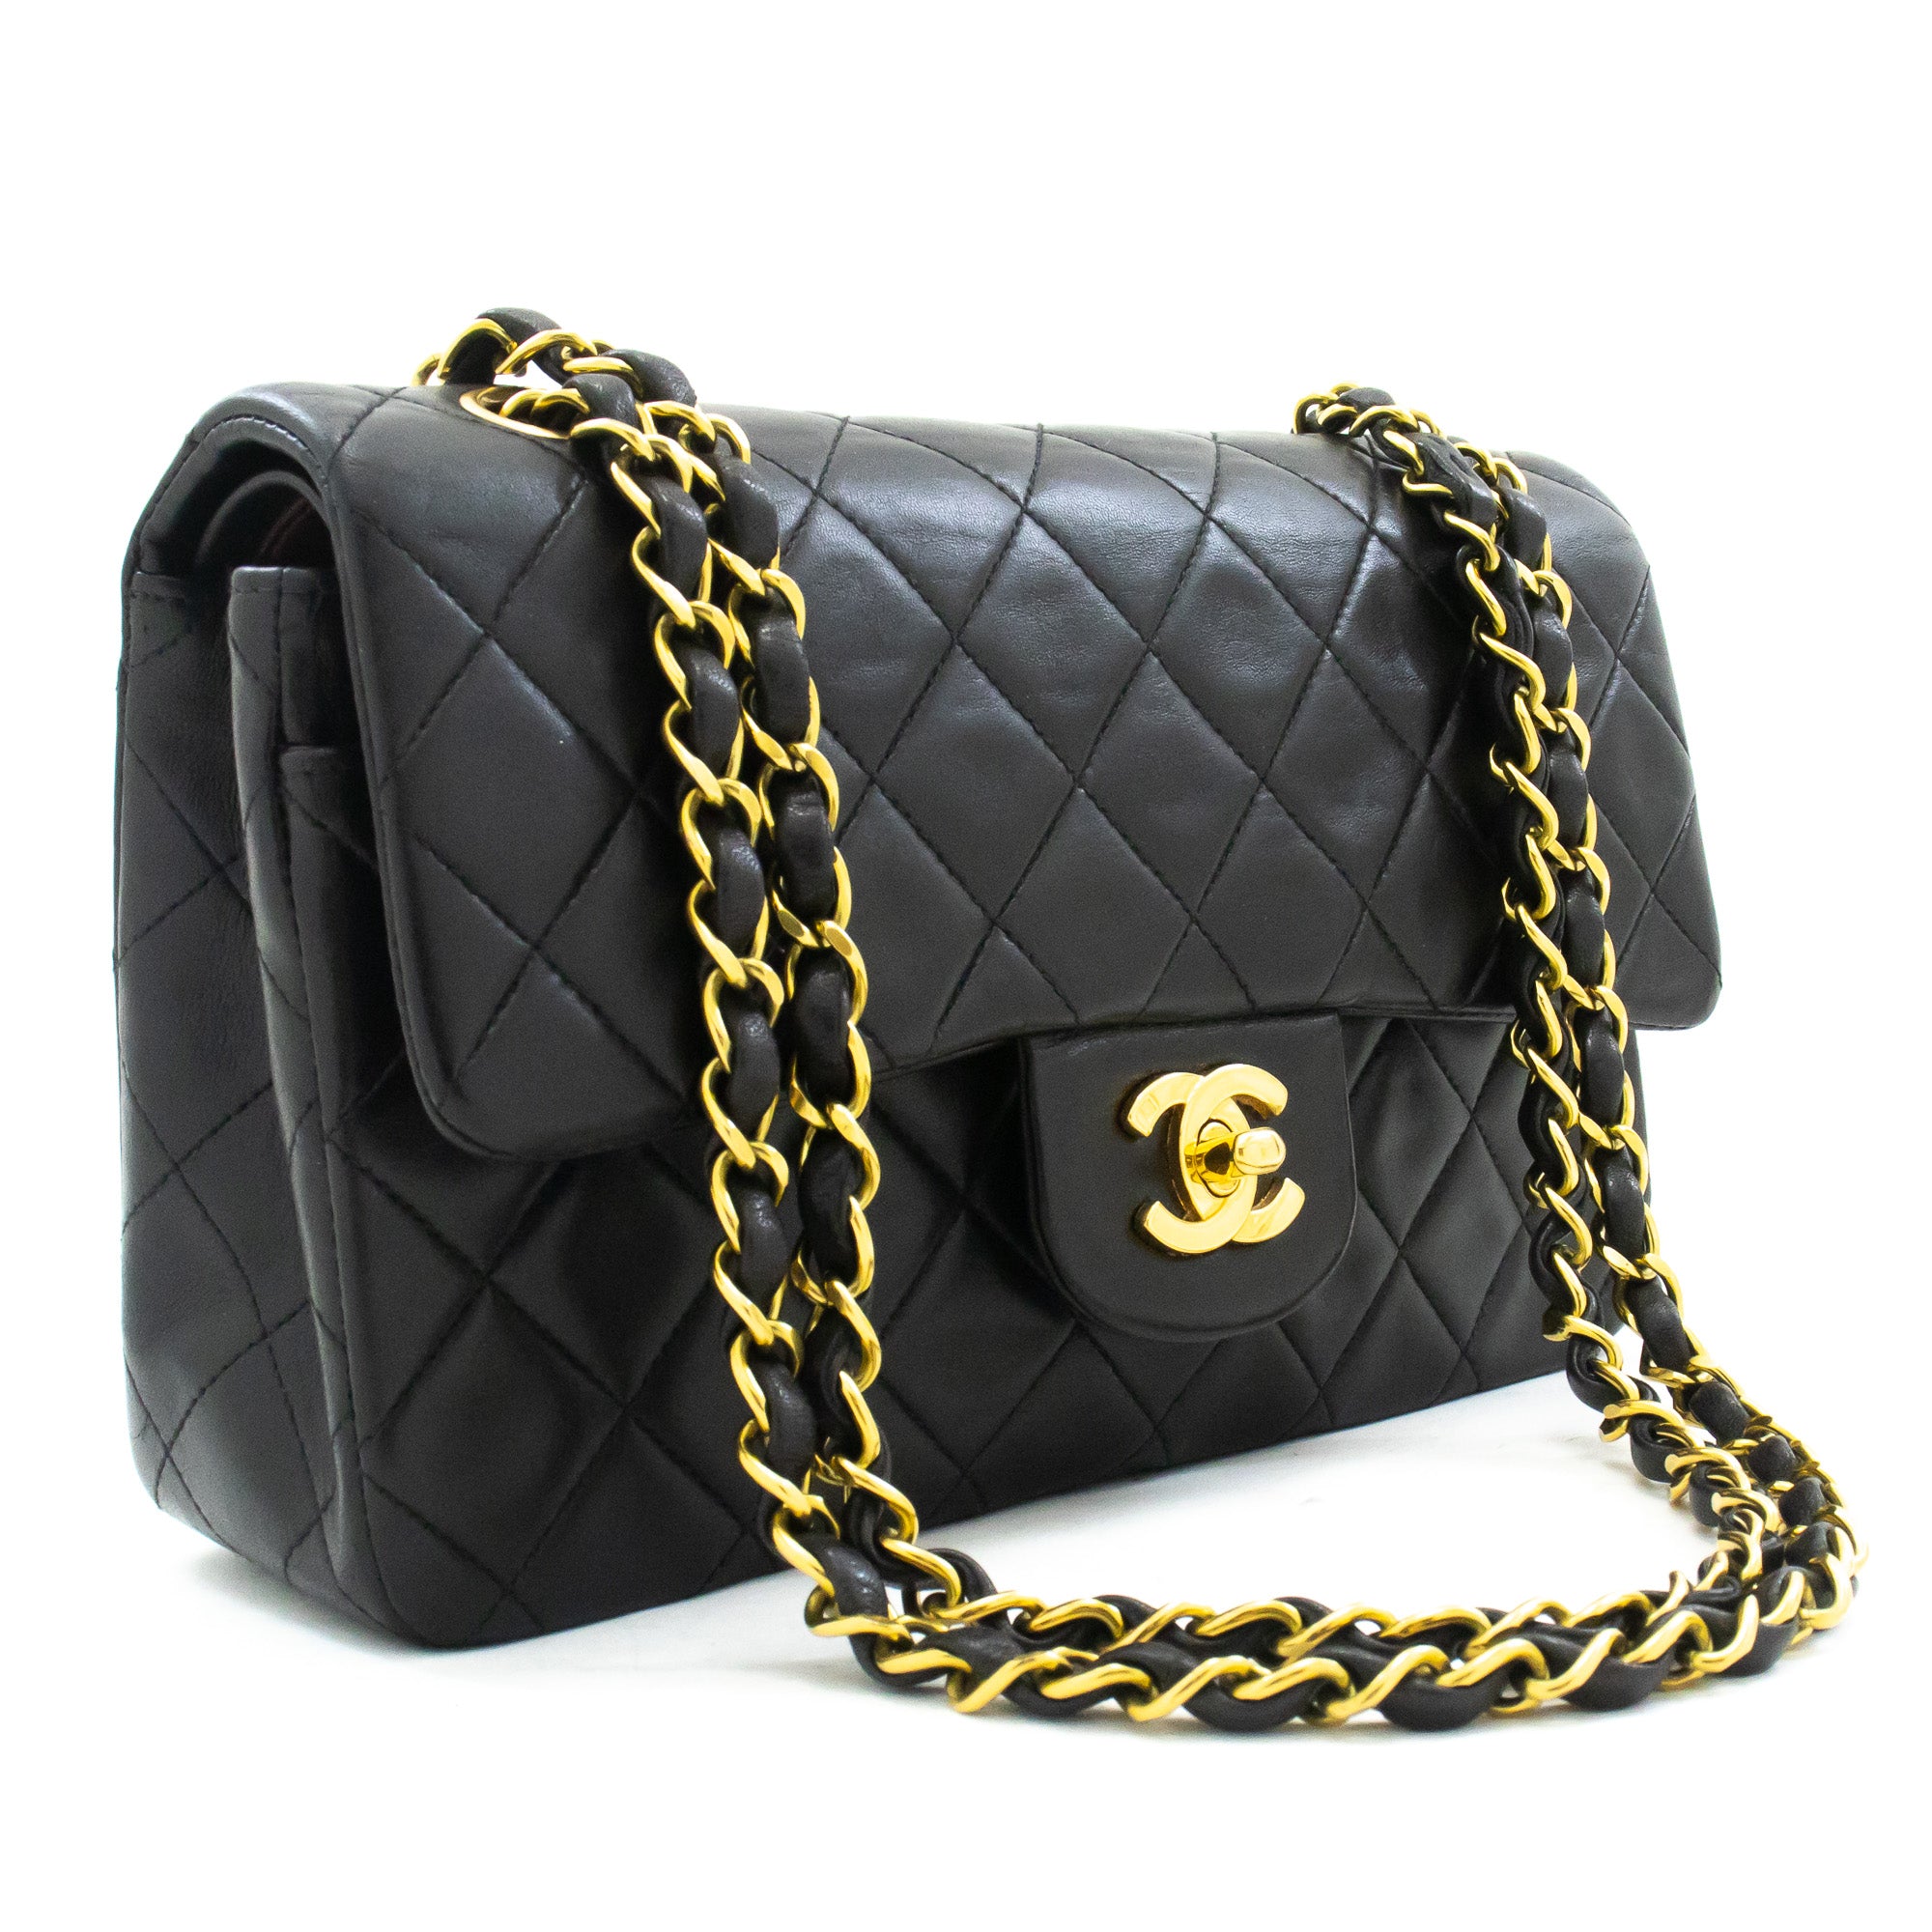 Chanel Full Flap Chain Shoulder Bag Black Quilted Lambskin Purse J65